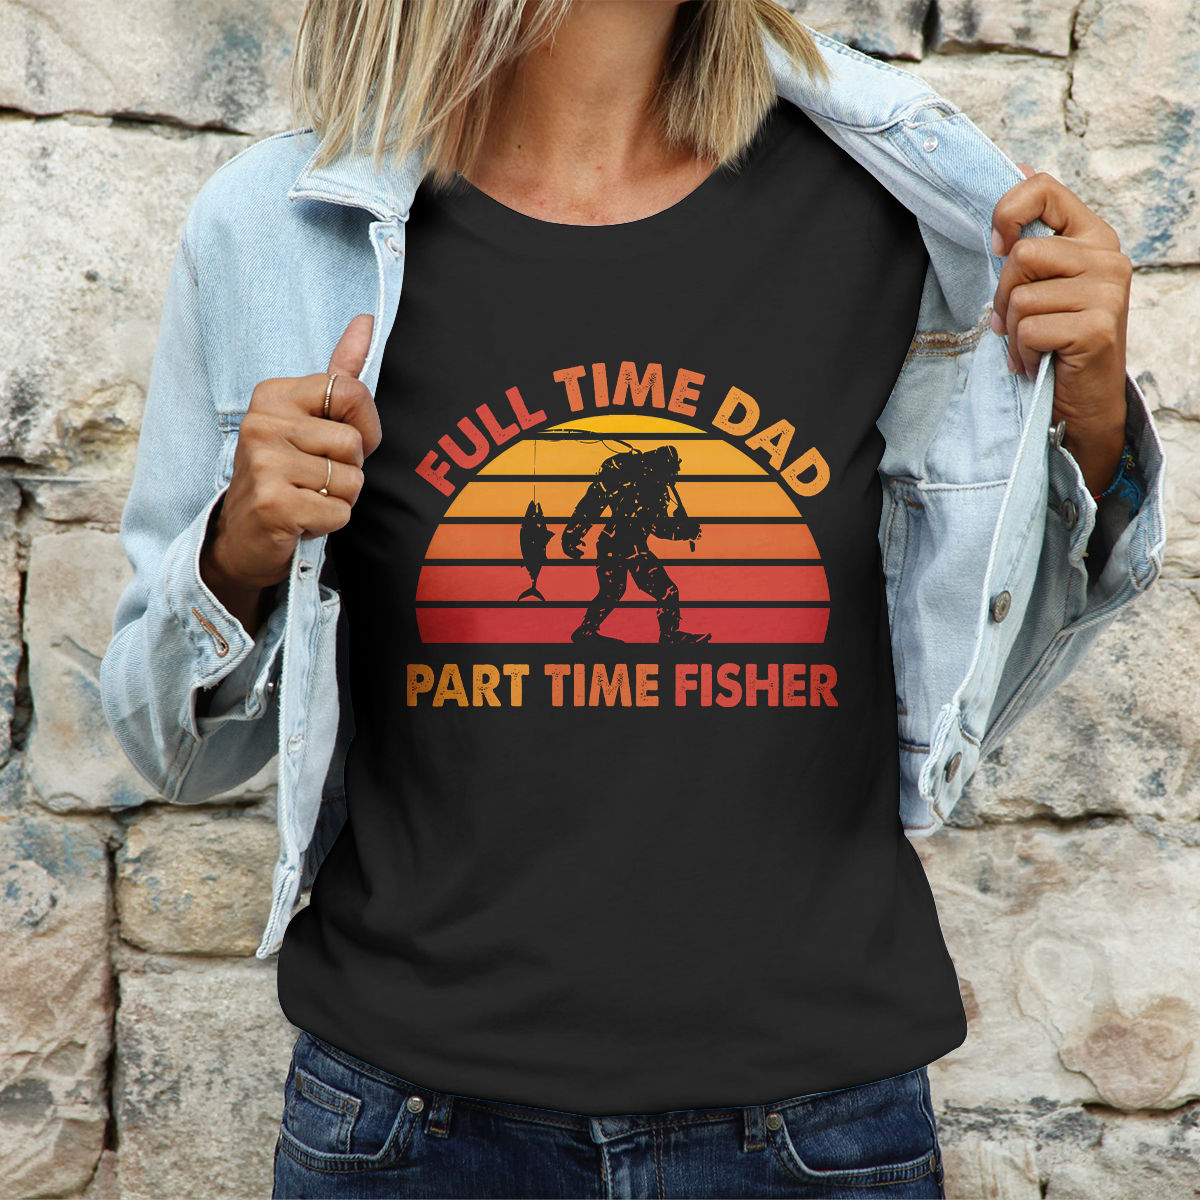 Father's Day - Full Time Dad, Part Time Fisher Shirt, Fishing Dad Shirt,  Father's Day Shirt, Love Dad Shirt, Gift For Father 28197